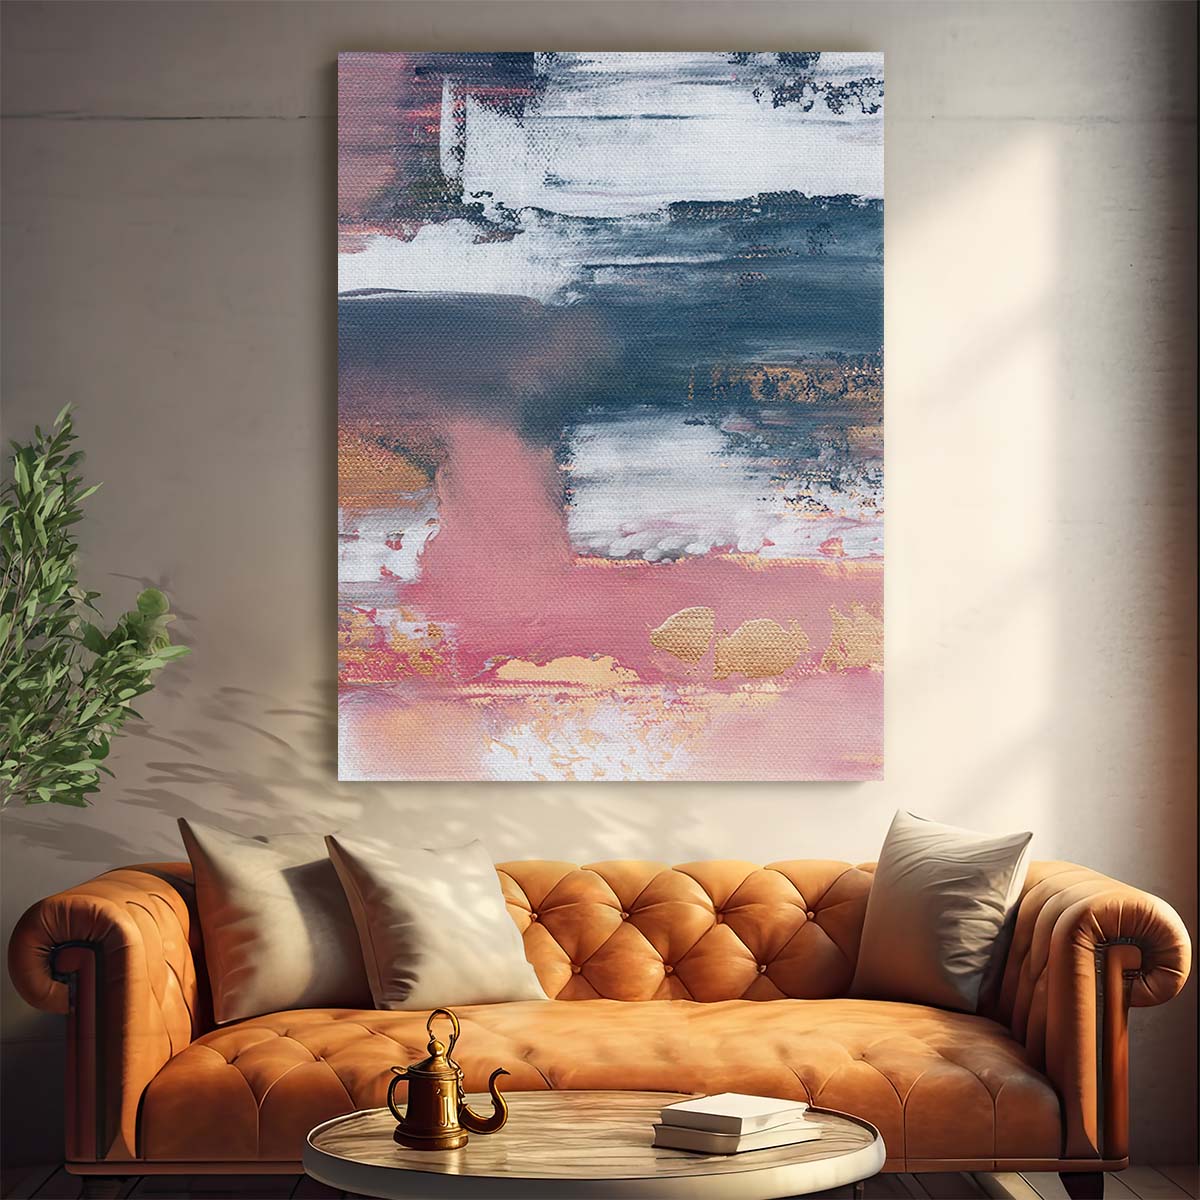 Colorful Tranquility Abstract Canvas Illustration - Blue Pink Painted Artwork by Luxuriance Designs, made in USA